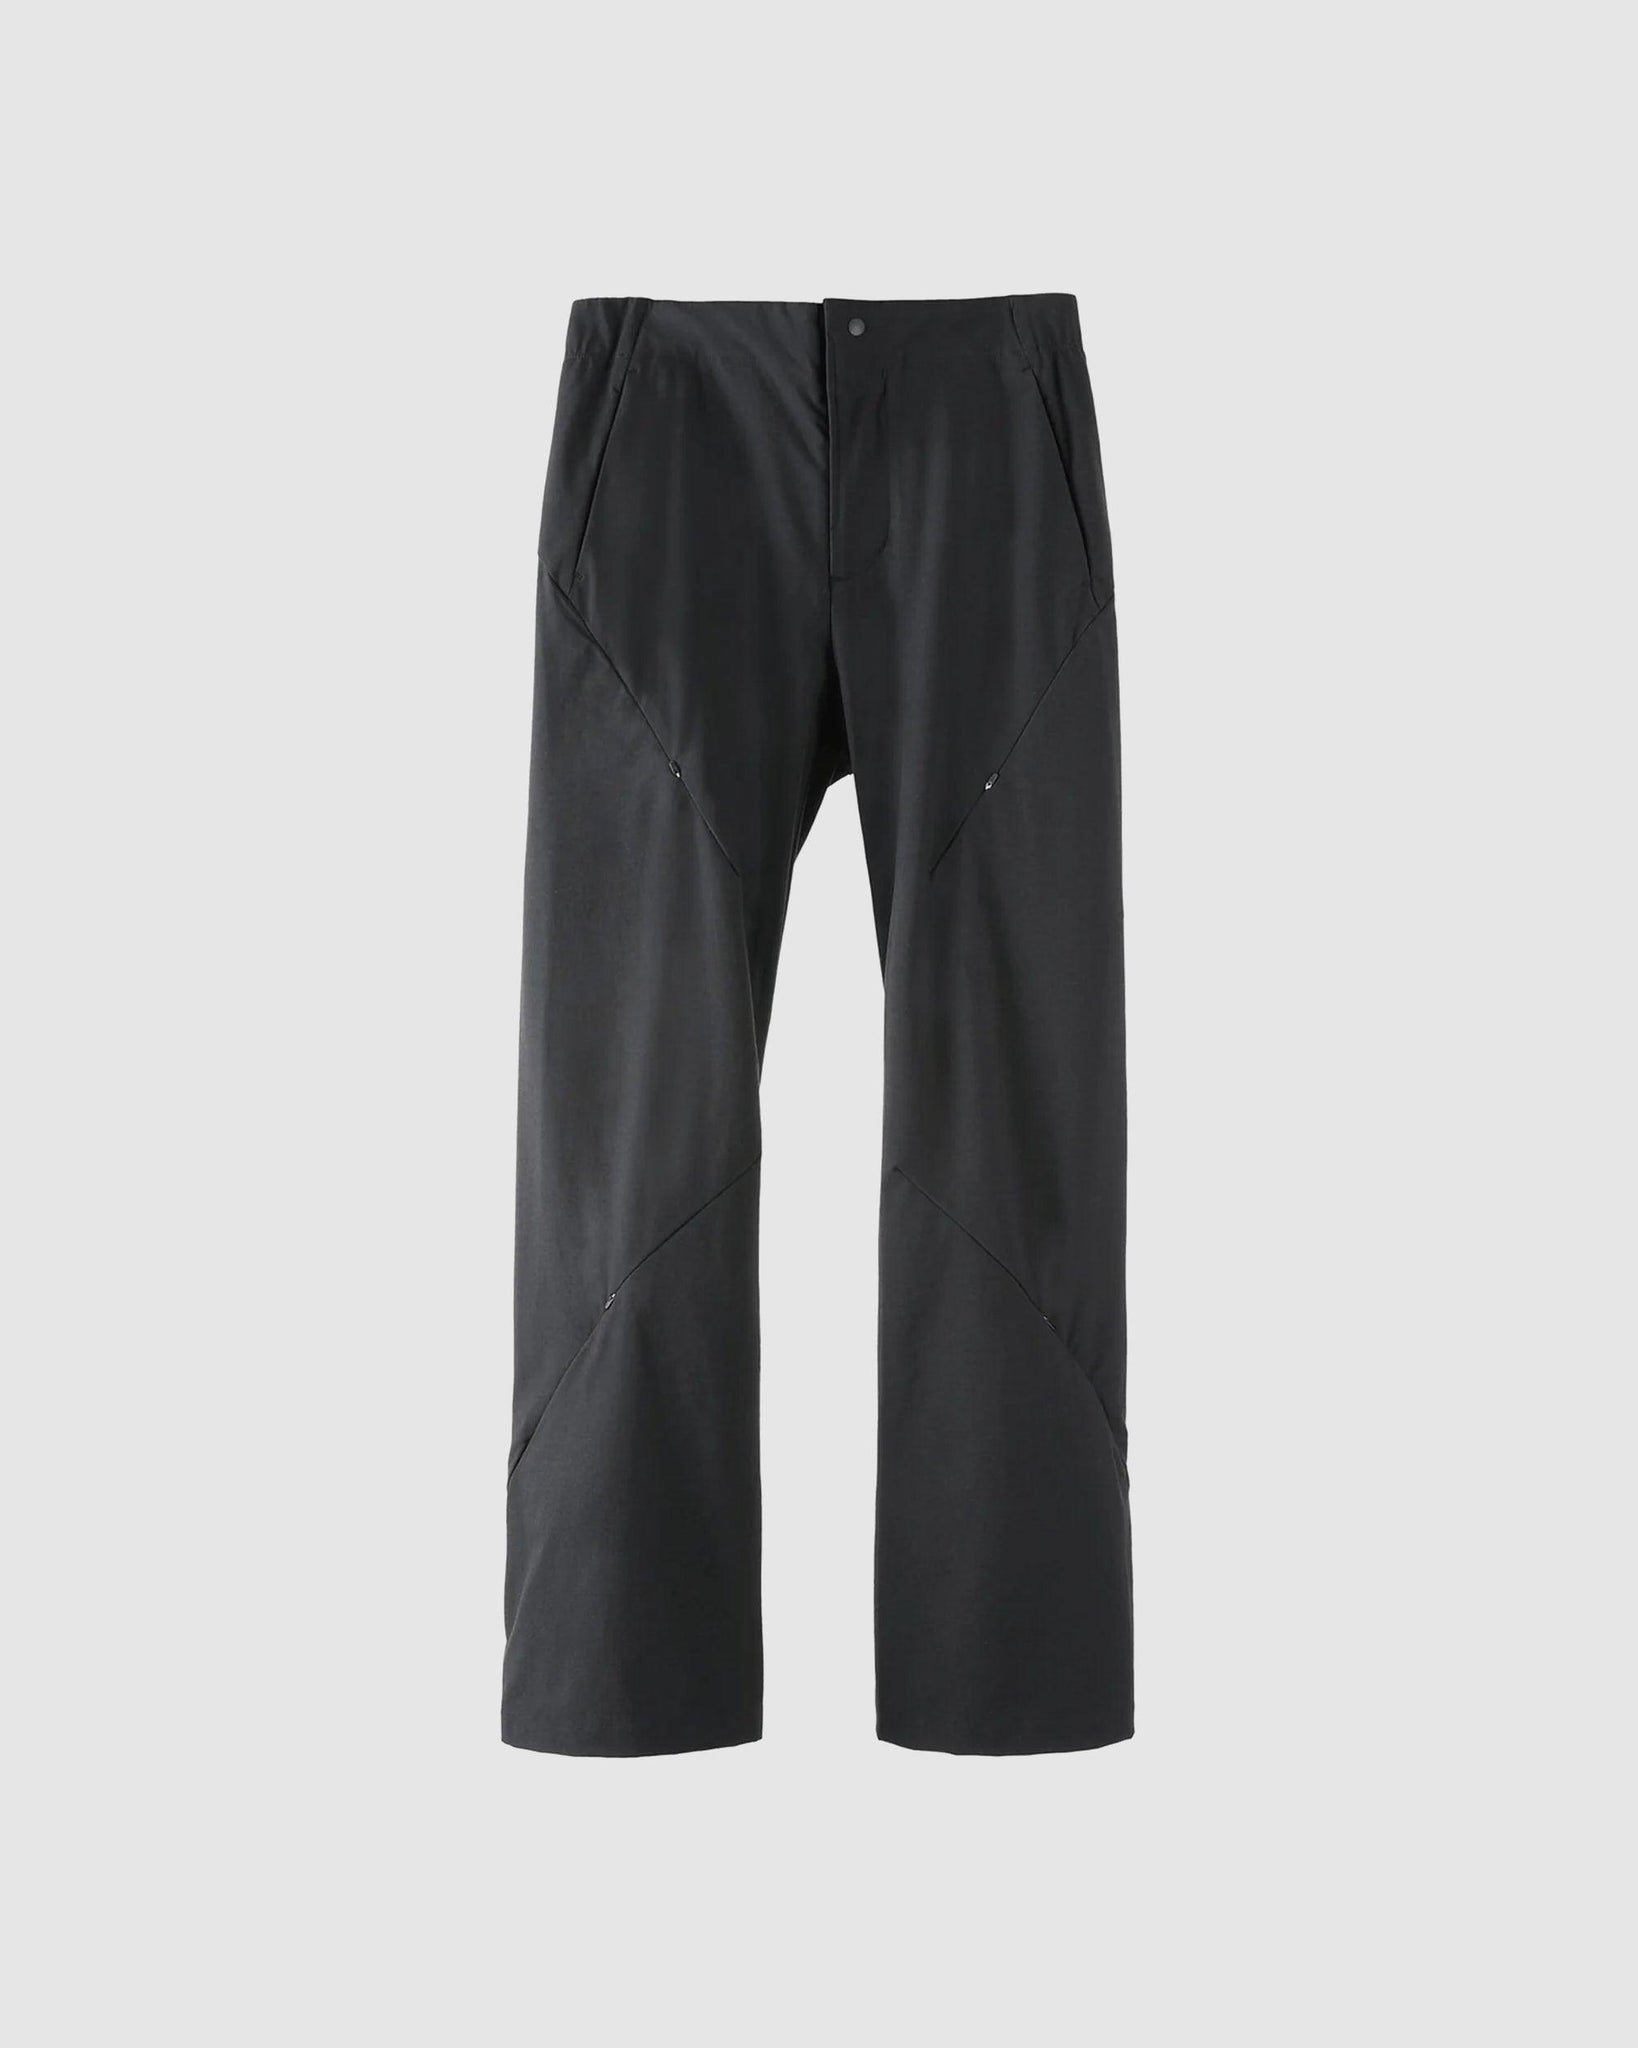 5.1 Technical Pants Black - {{ collection.title }} - Chinatown Country Club 